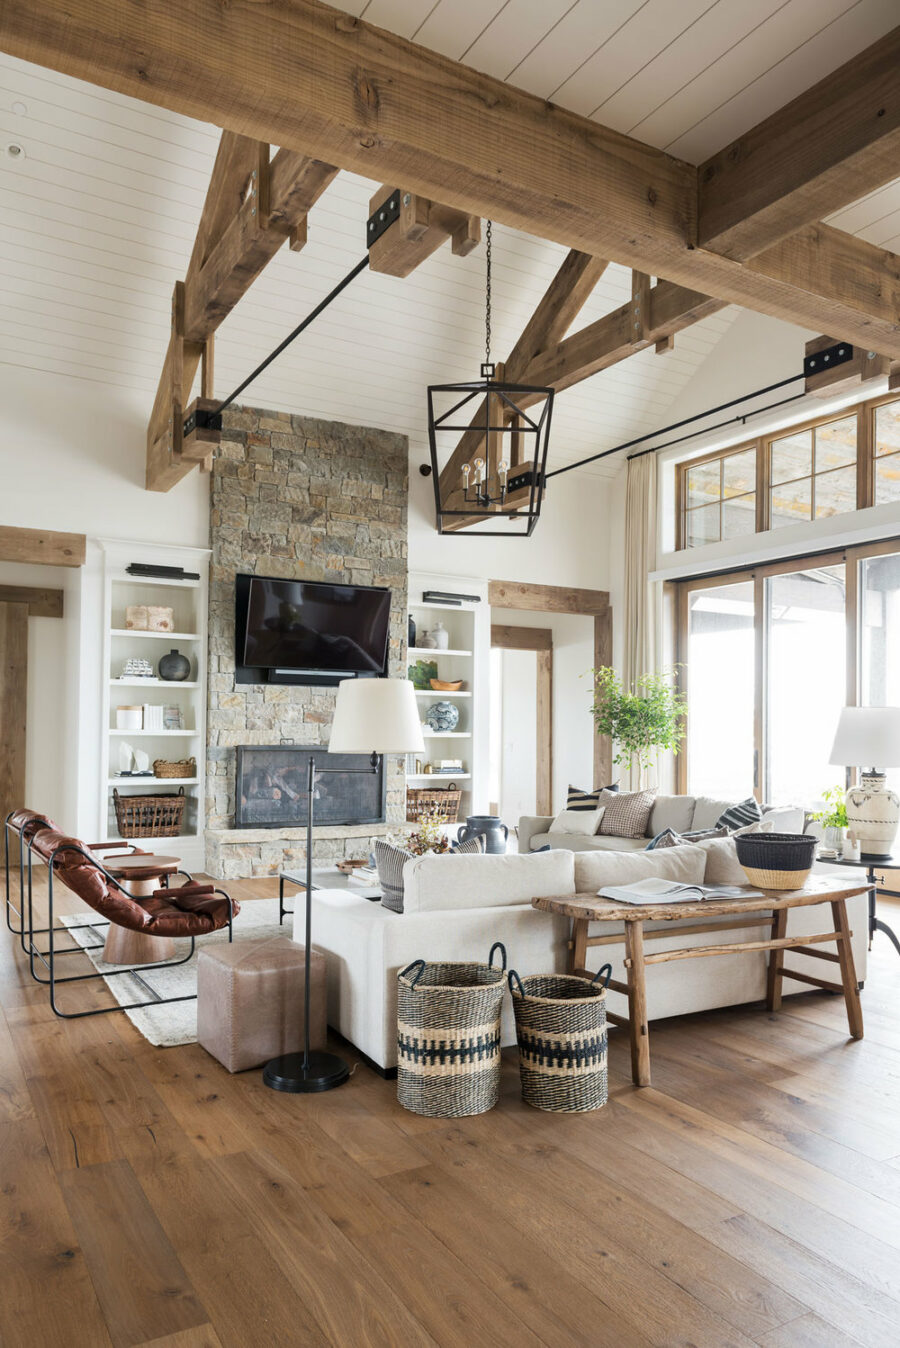 25 Rustic Modern House Design Ideas to Inspire You